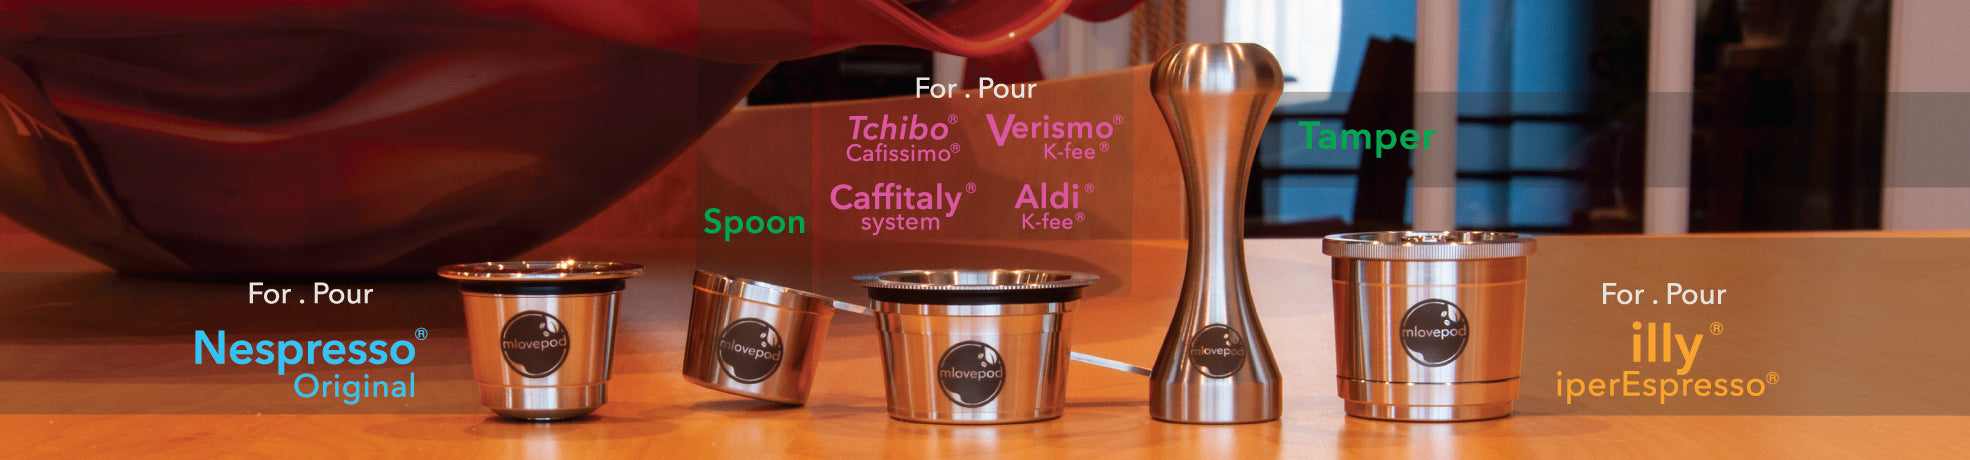 mlovepod is a Reusable and Refillable stainless steel Eco-Friendly coffee capsules for illy, Nespresso, Caffitaly, Aldi